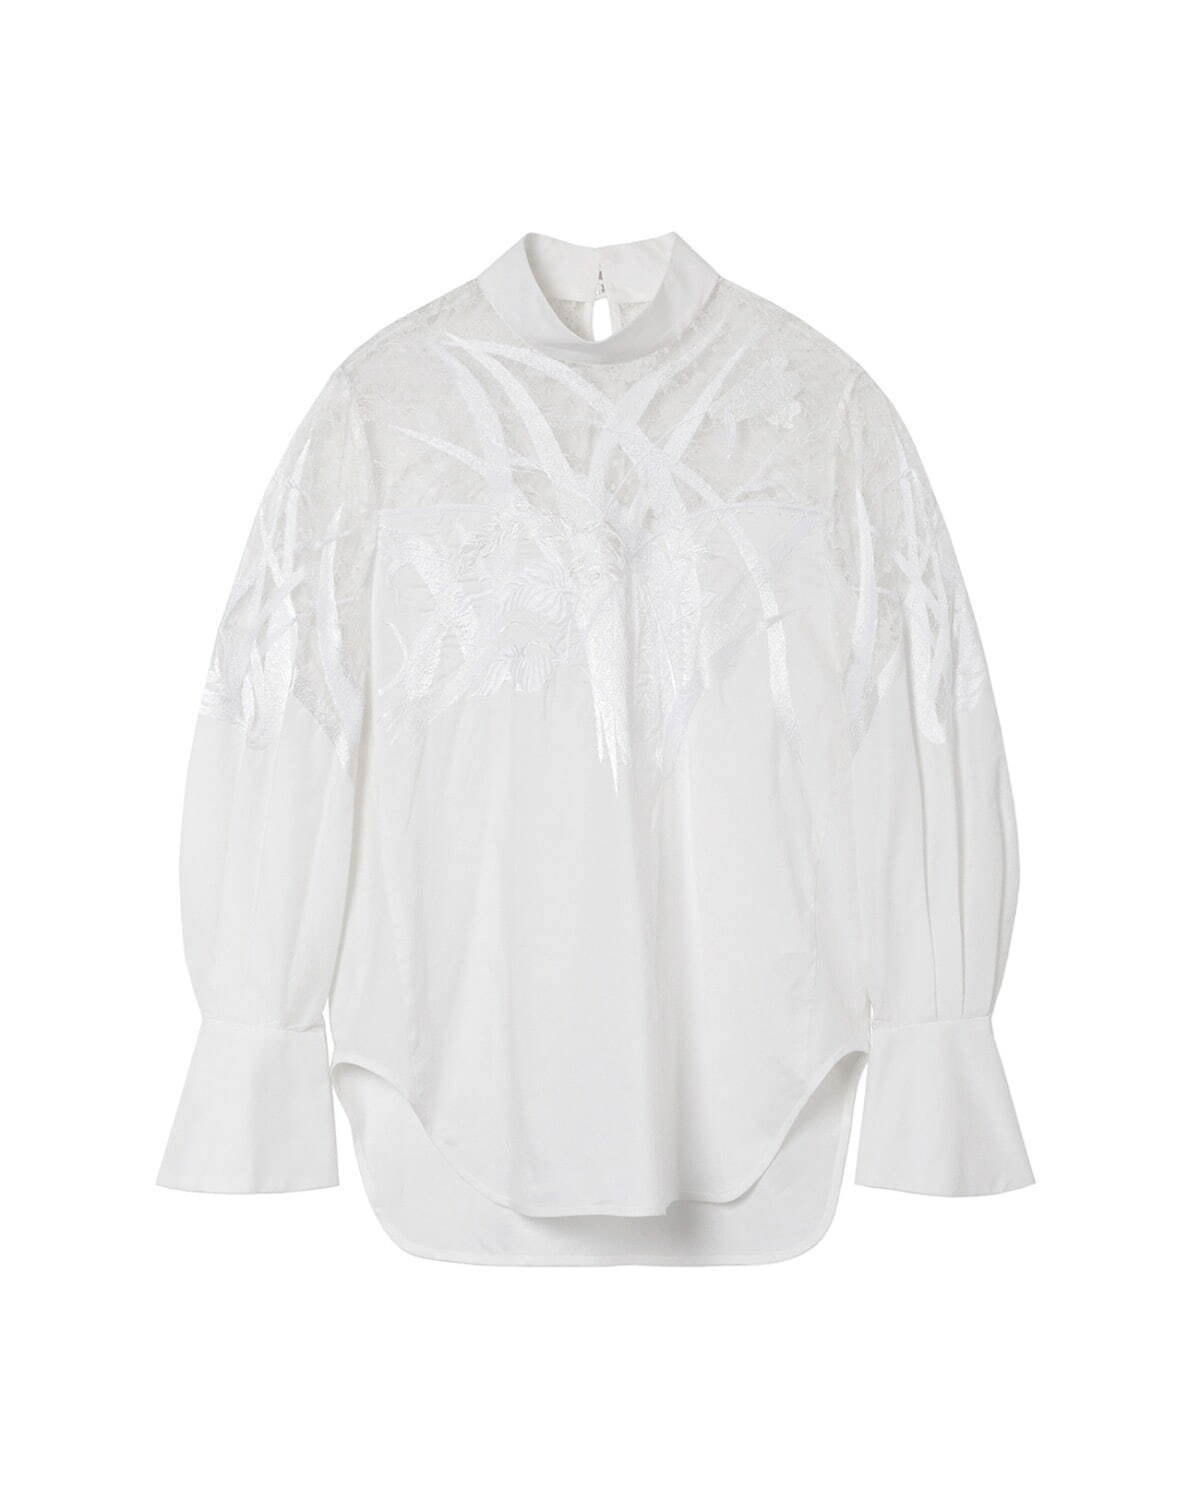 Botanical Embroidery Leaver Lace Blouse 187,000円